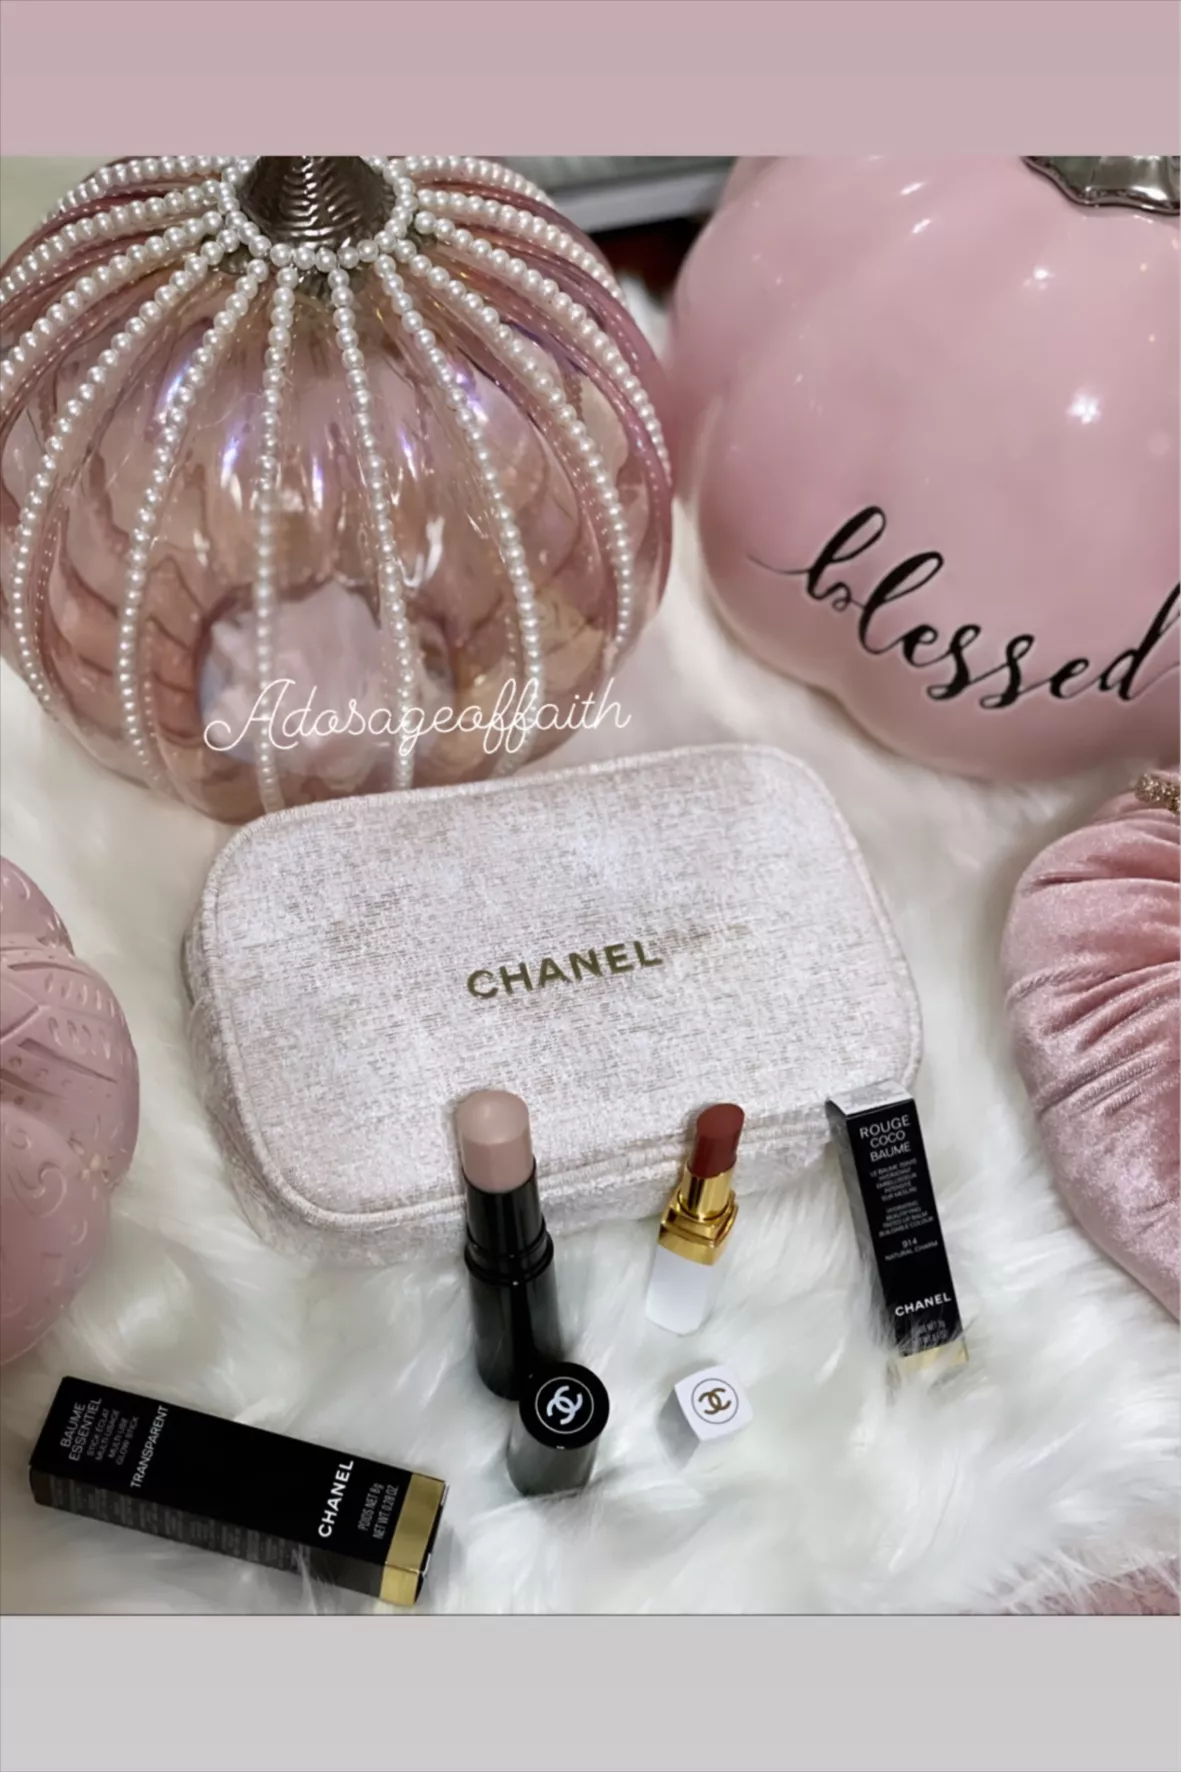 CHANEL Les Beiges Healthy Glow Multi-Colour in #01 – First impressions